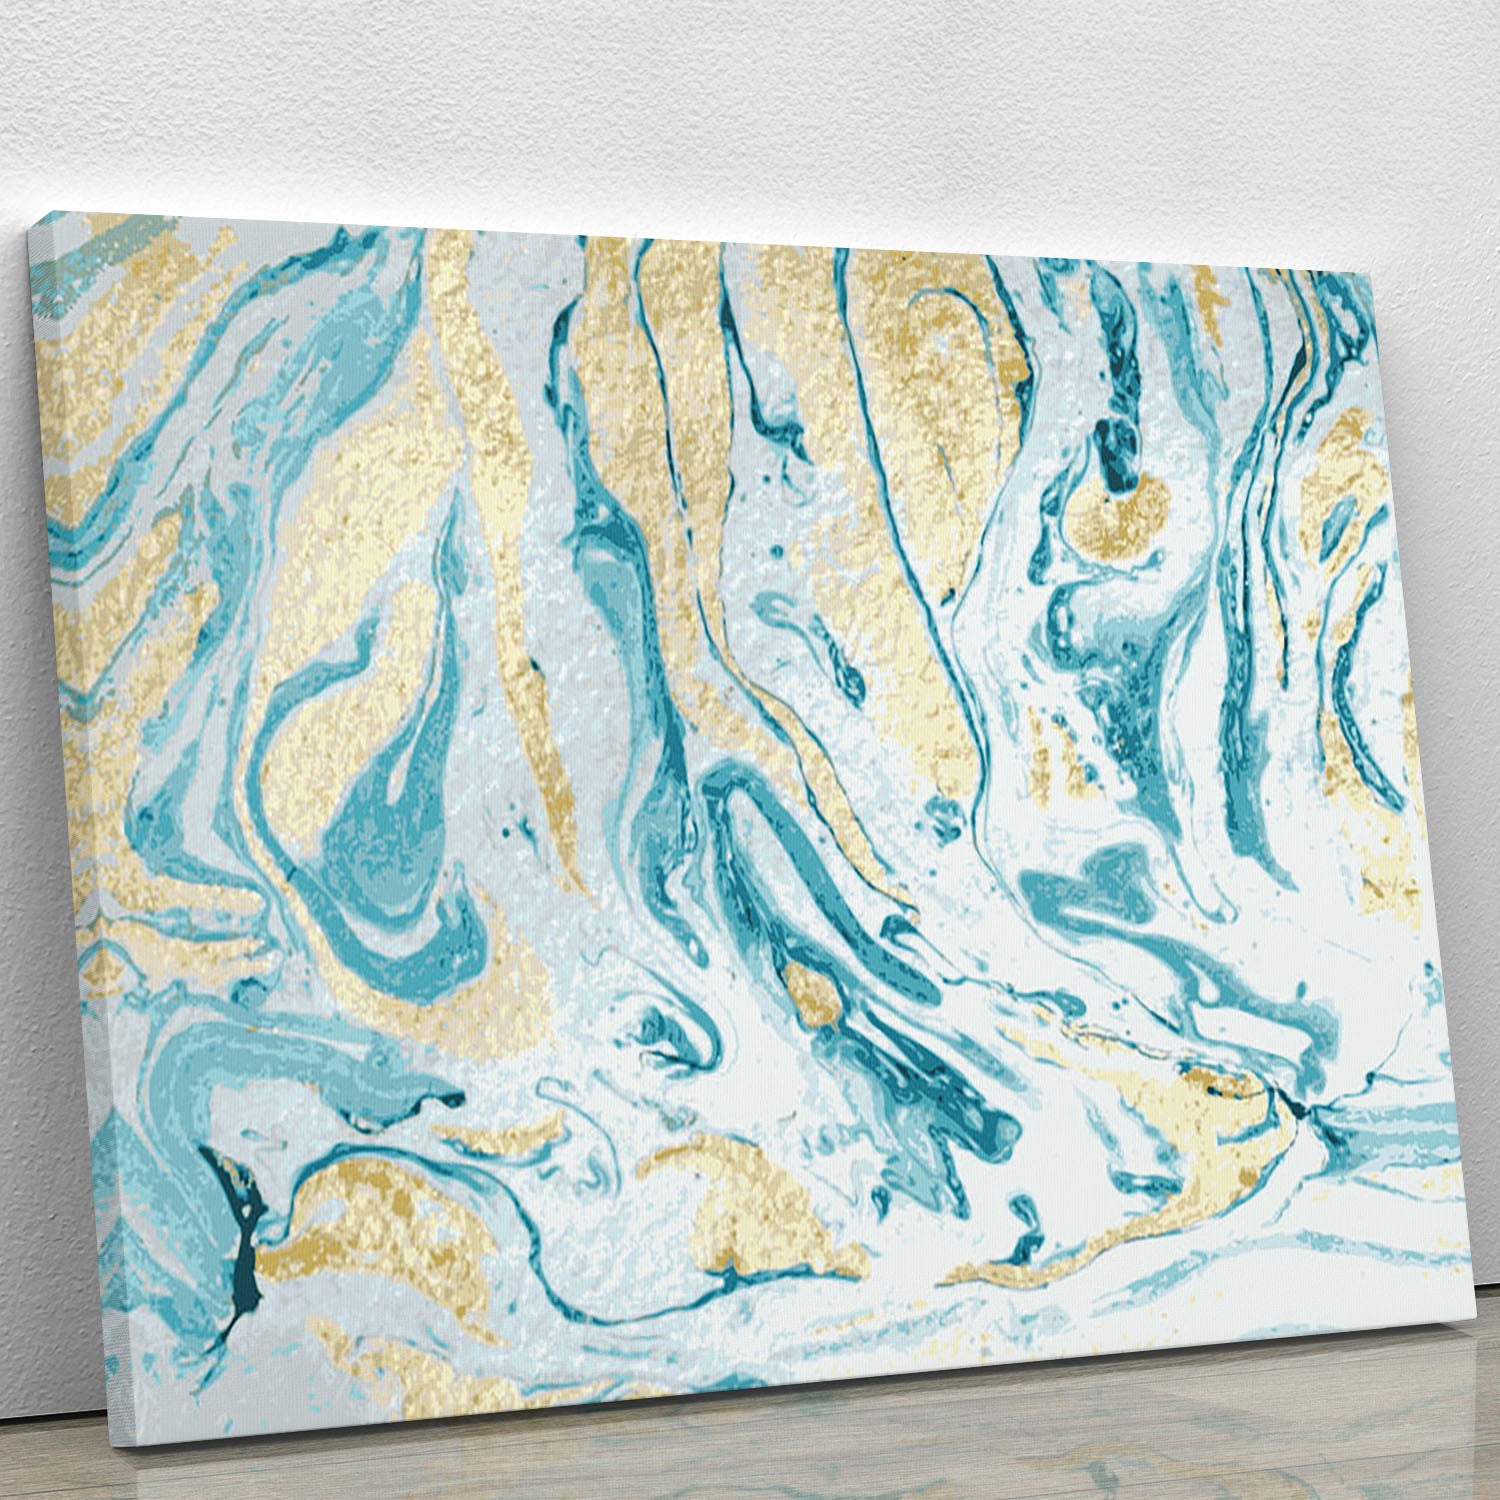 Gold and Teal Swirled Marble Canvas Print or Poster - Canvas Art Rocks - 1